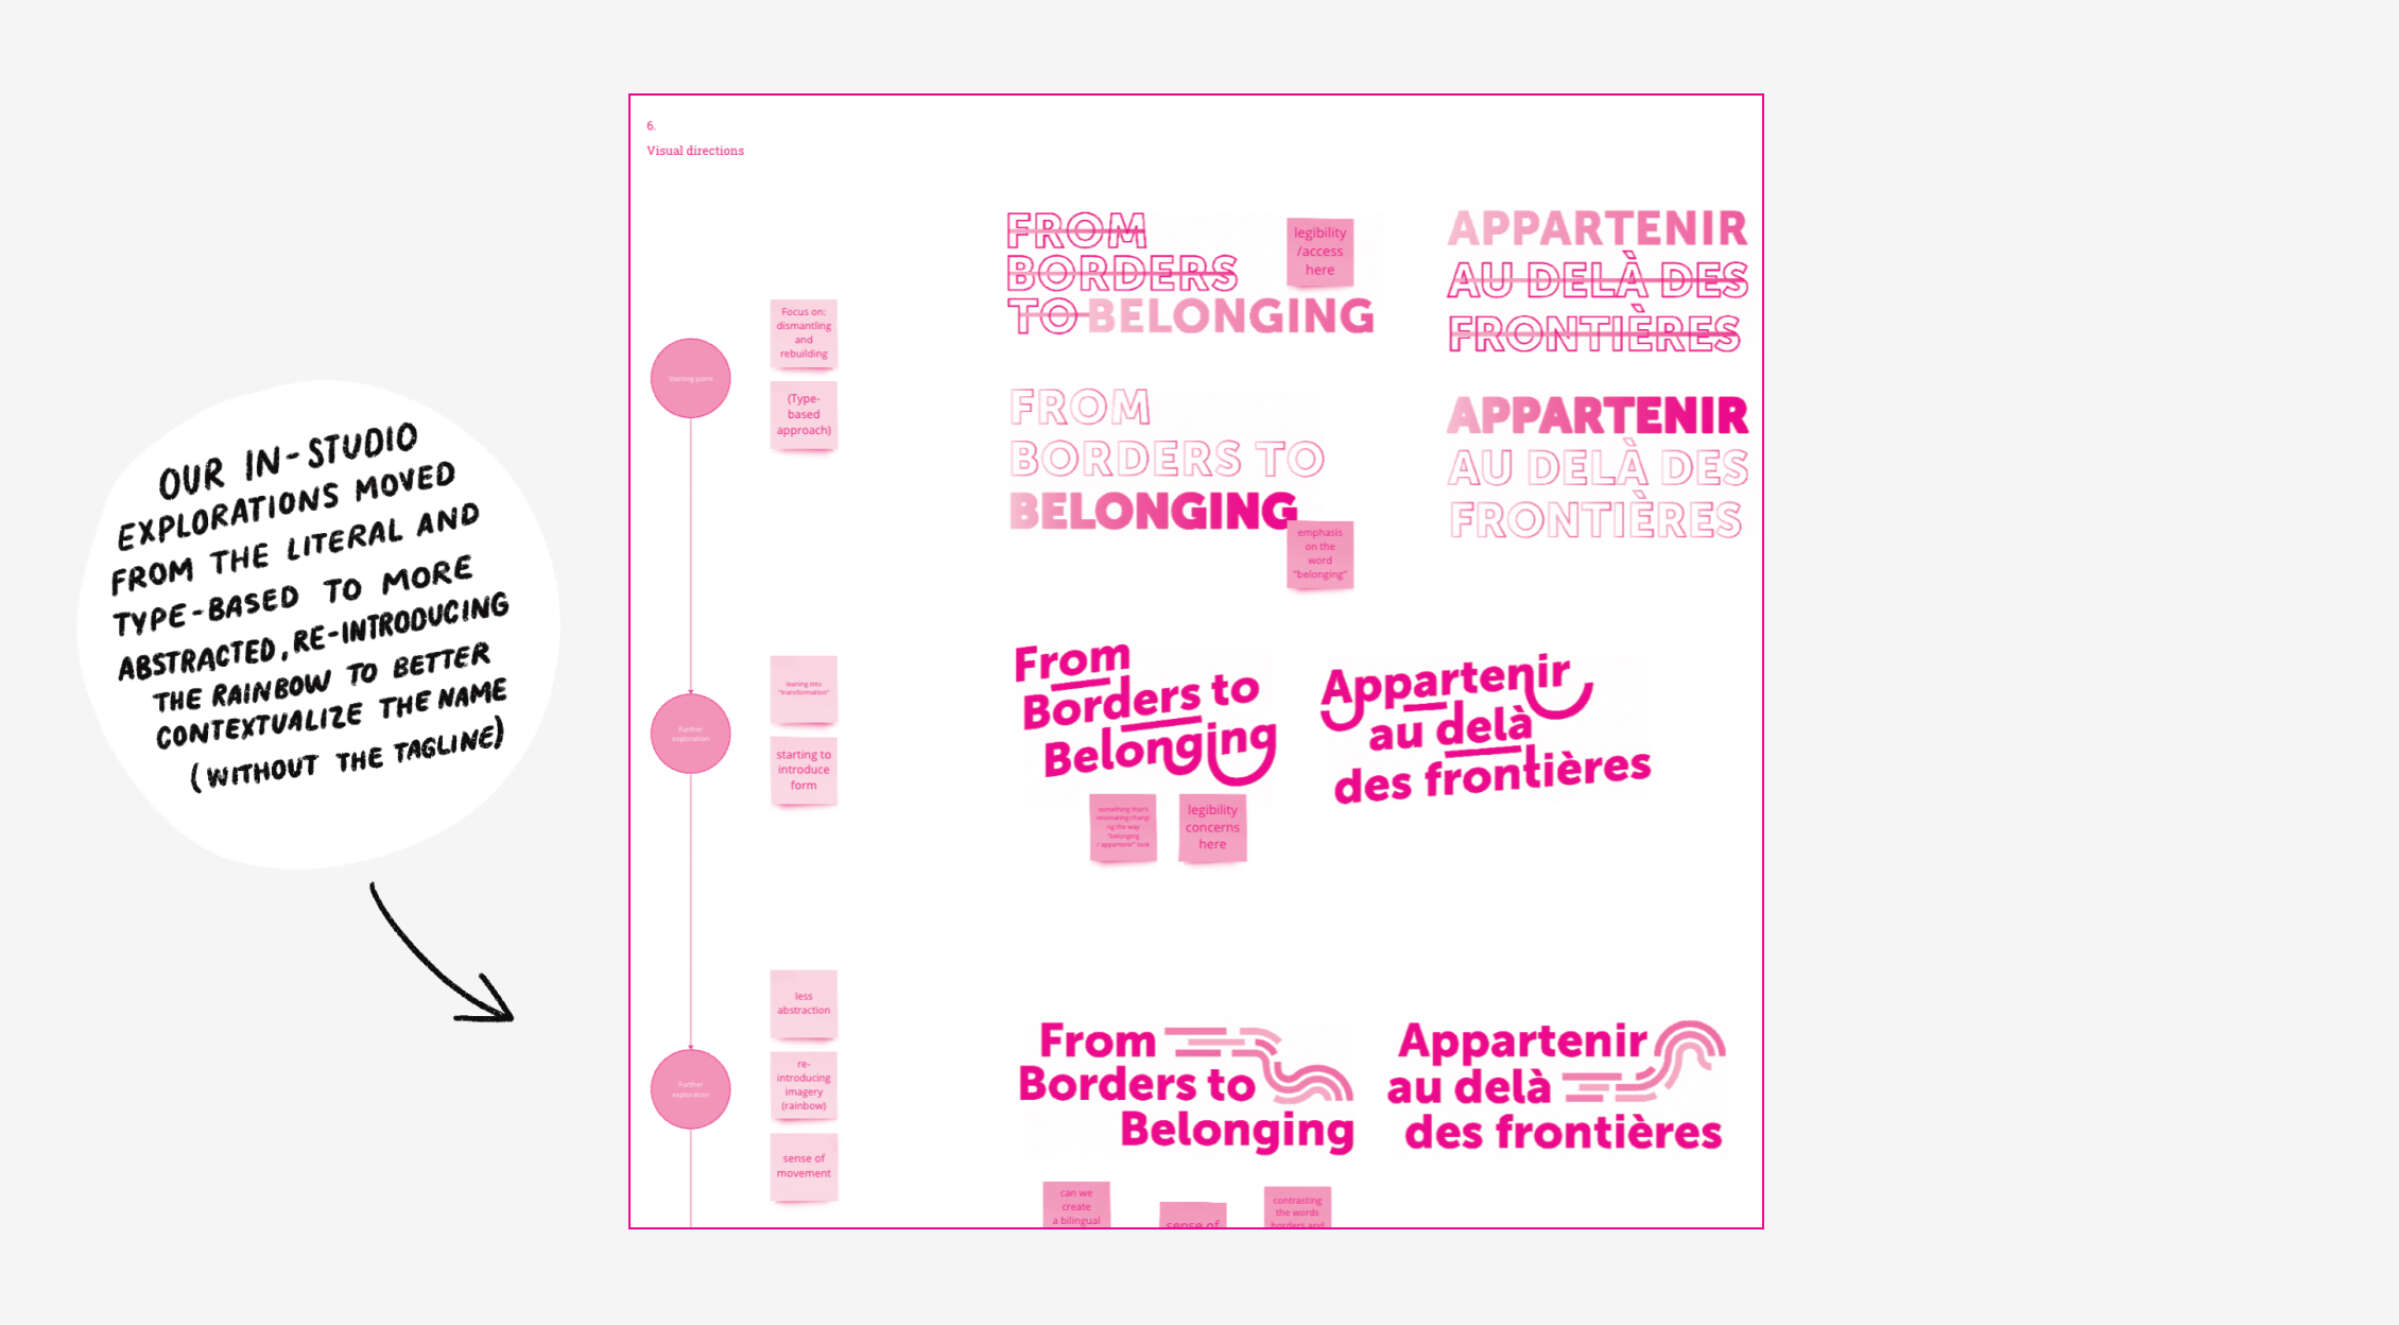 An image showing various logo design concept explorations for the phrase "From Borders to Belonging" in both English and French. The concepts range from literal type-based designs to more abstract designs. A note on the side mentions exploring the rainbow without the machine.